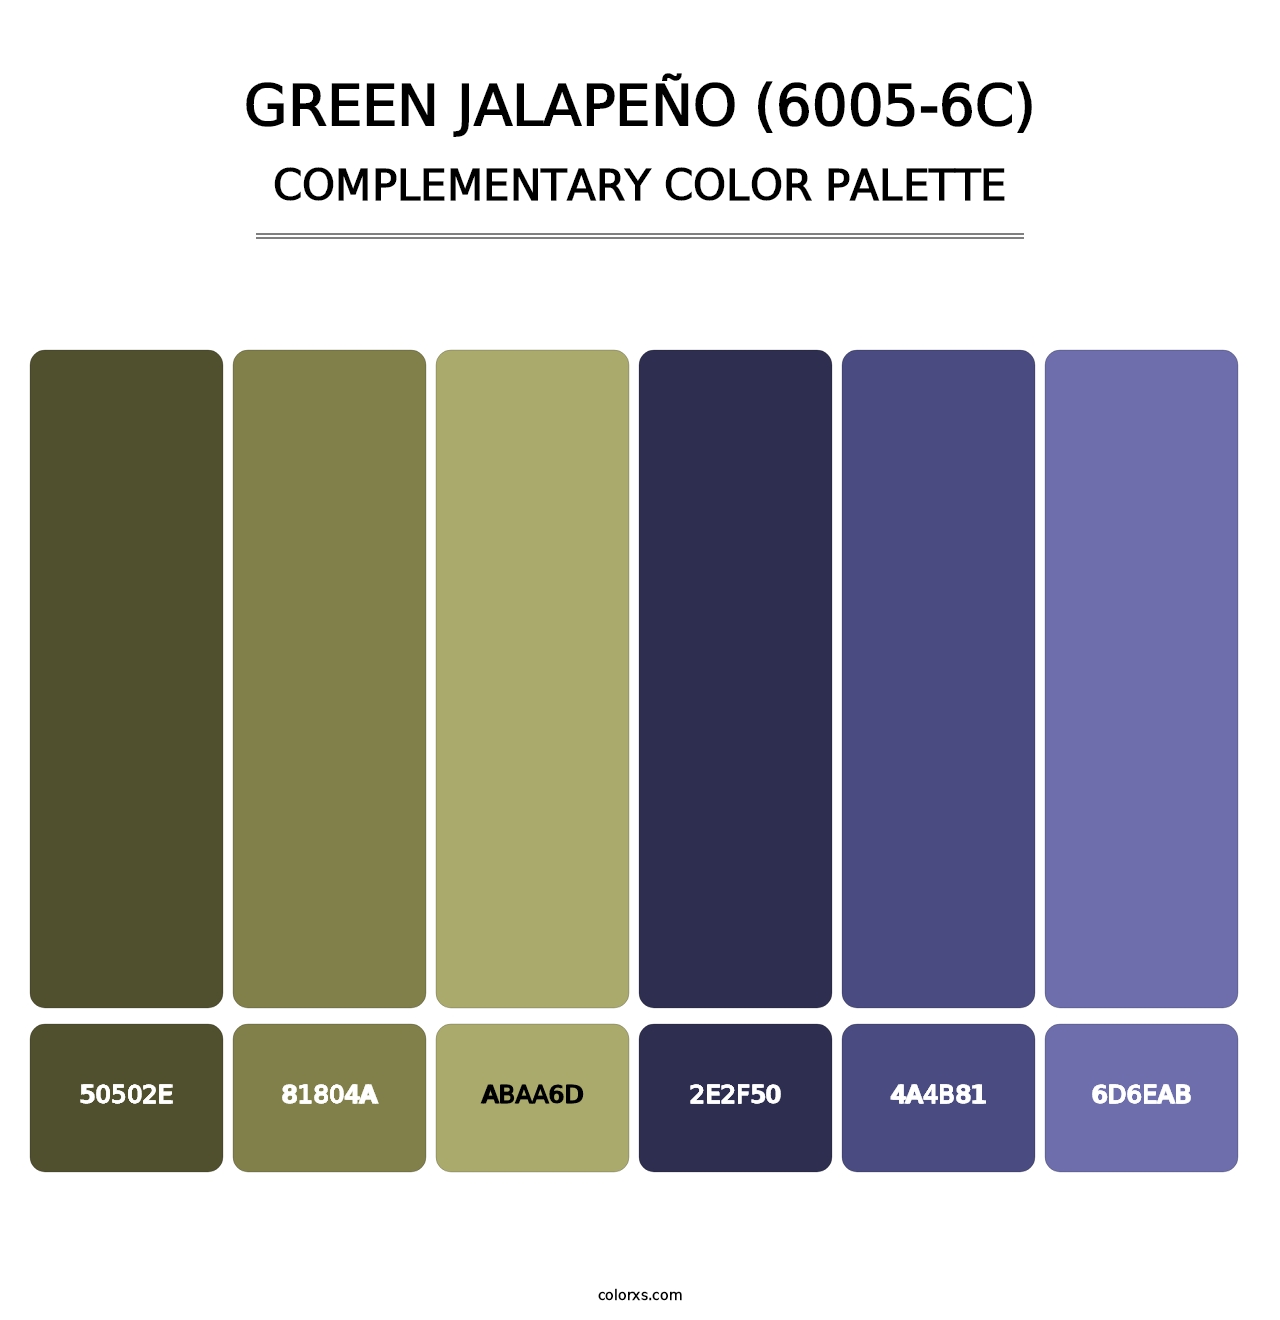 Green Jalapeño (6005-6C) - Complementary Color Palette